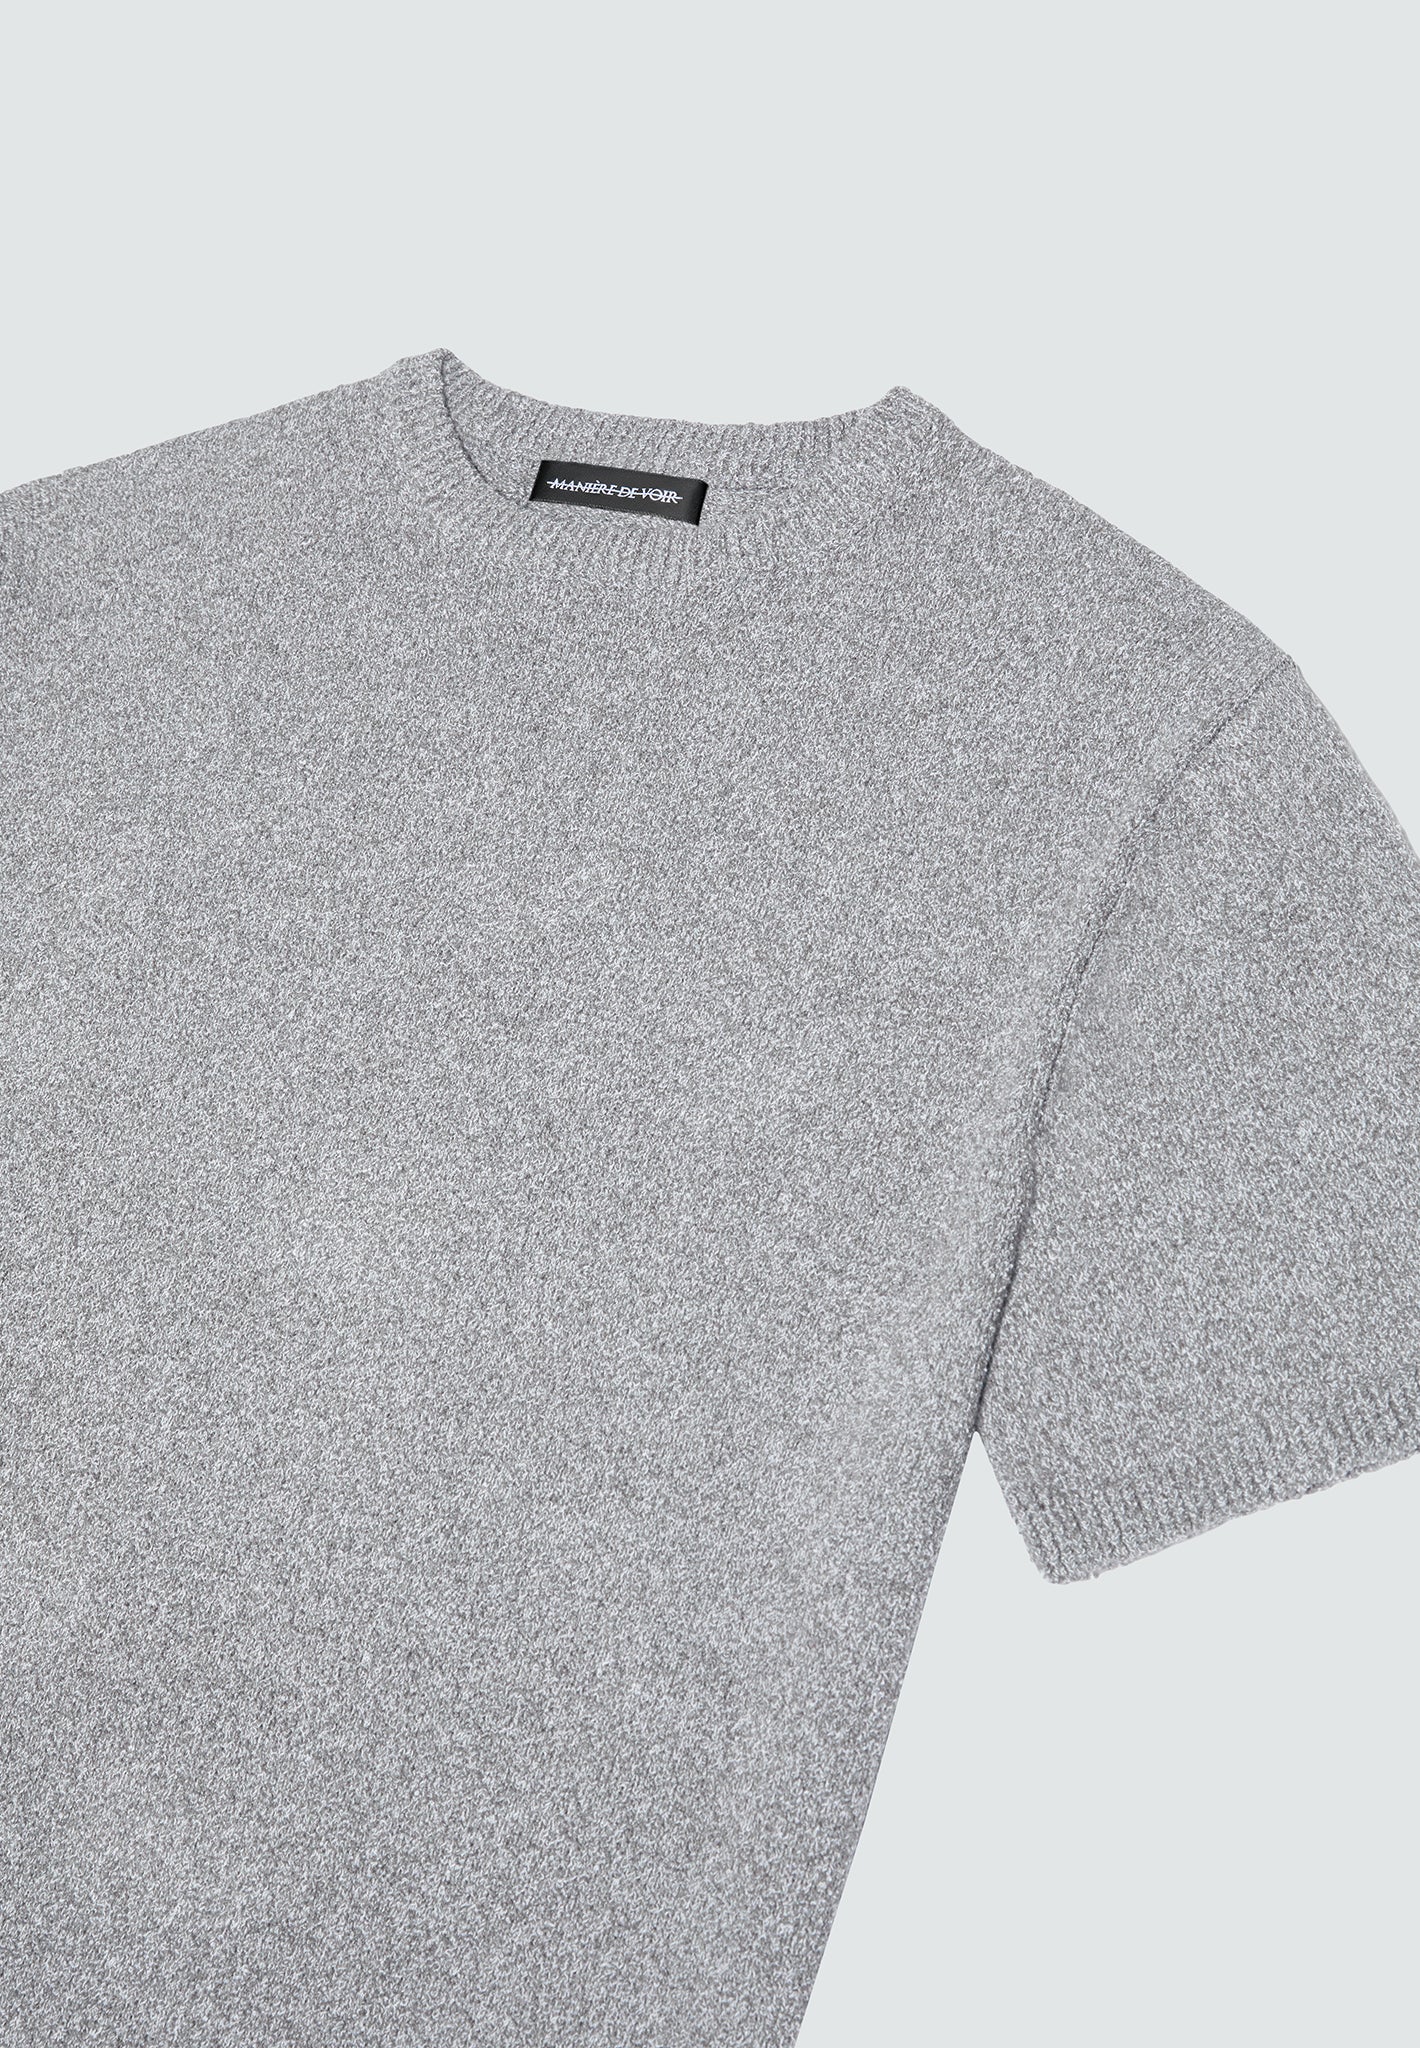 boucle-knit-oversized-fit-t-shirt-grey-marl